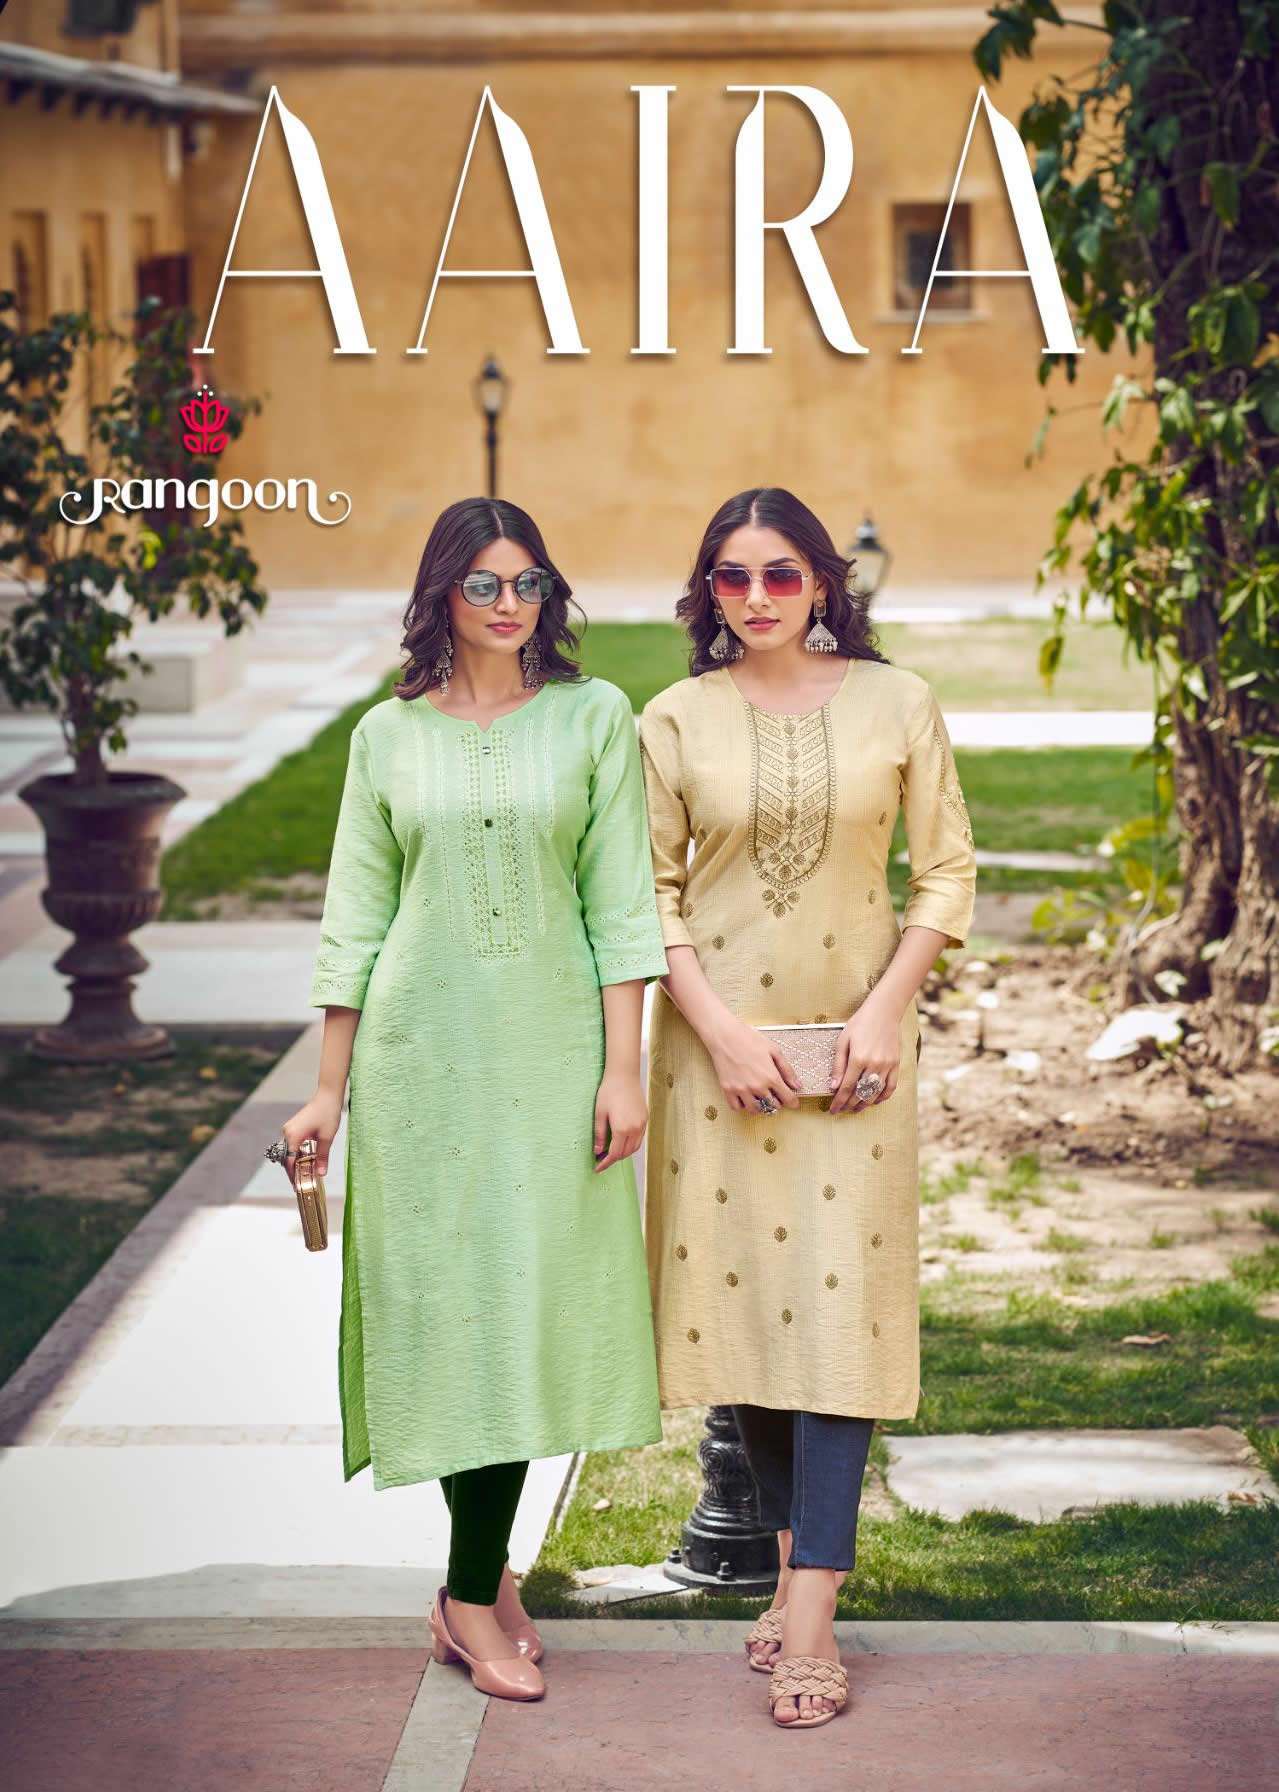 AAIRA VISCOSE WITH HEAVY EMBROIDERY NECK AND SLEEV WORK KURTI  BY RANGOON BRAND WHOLESALER AND DEALE...